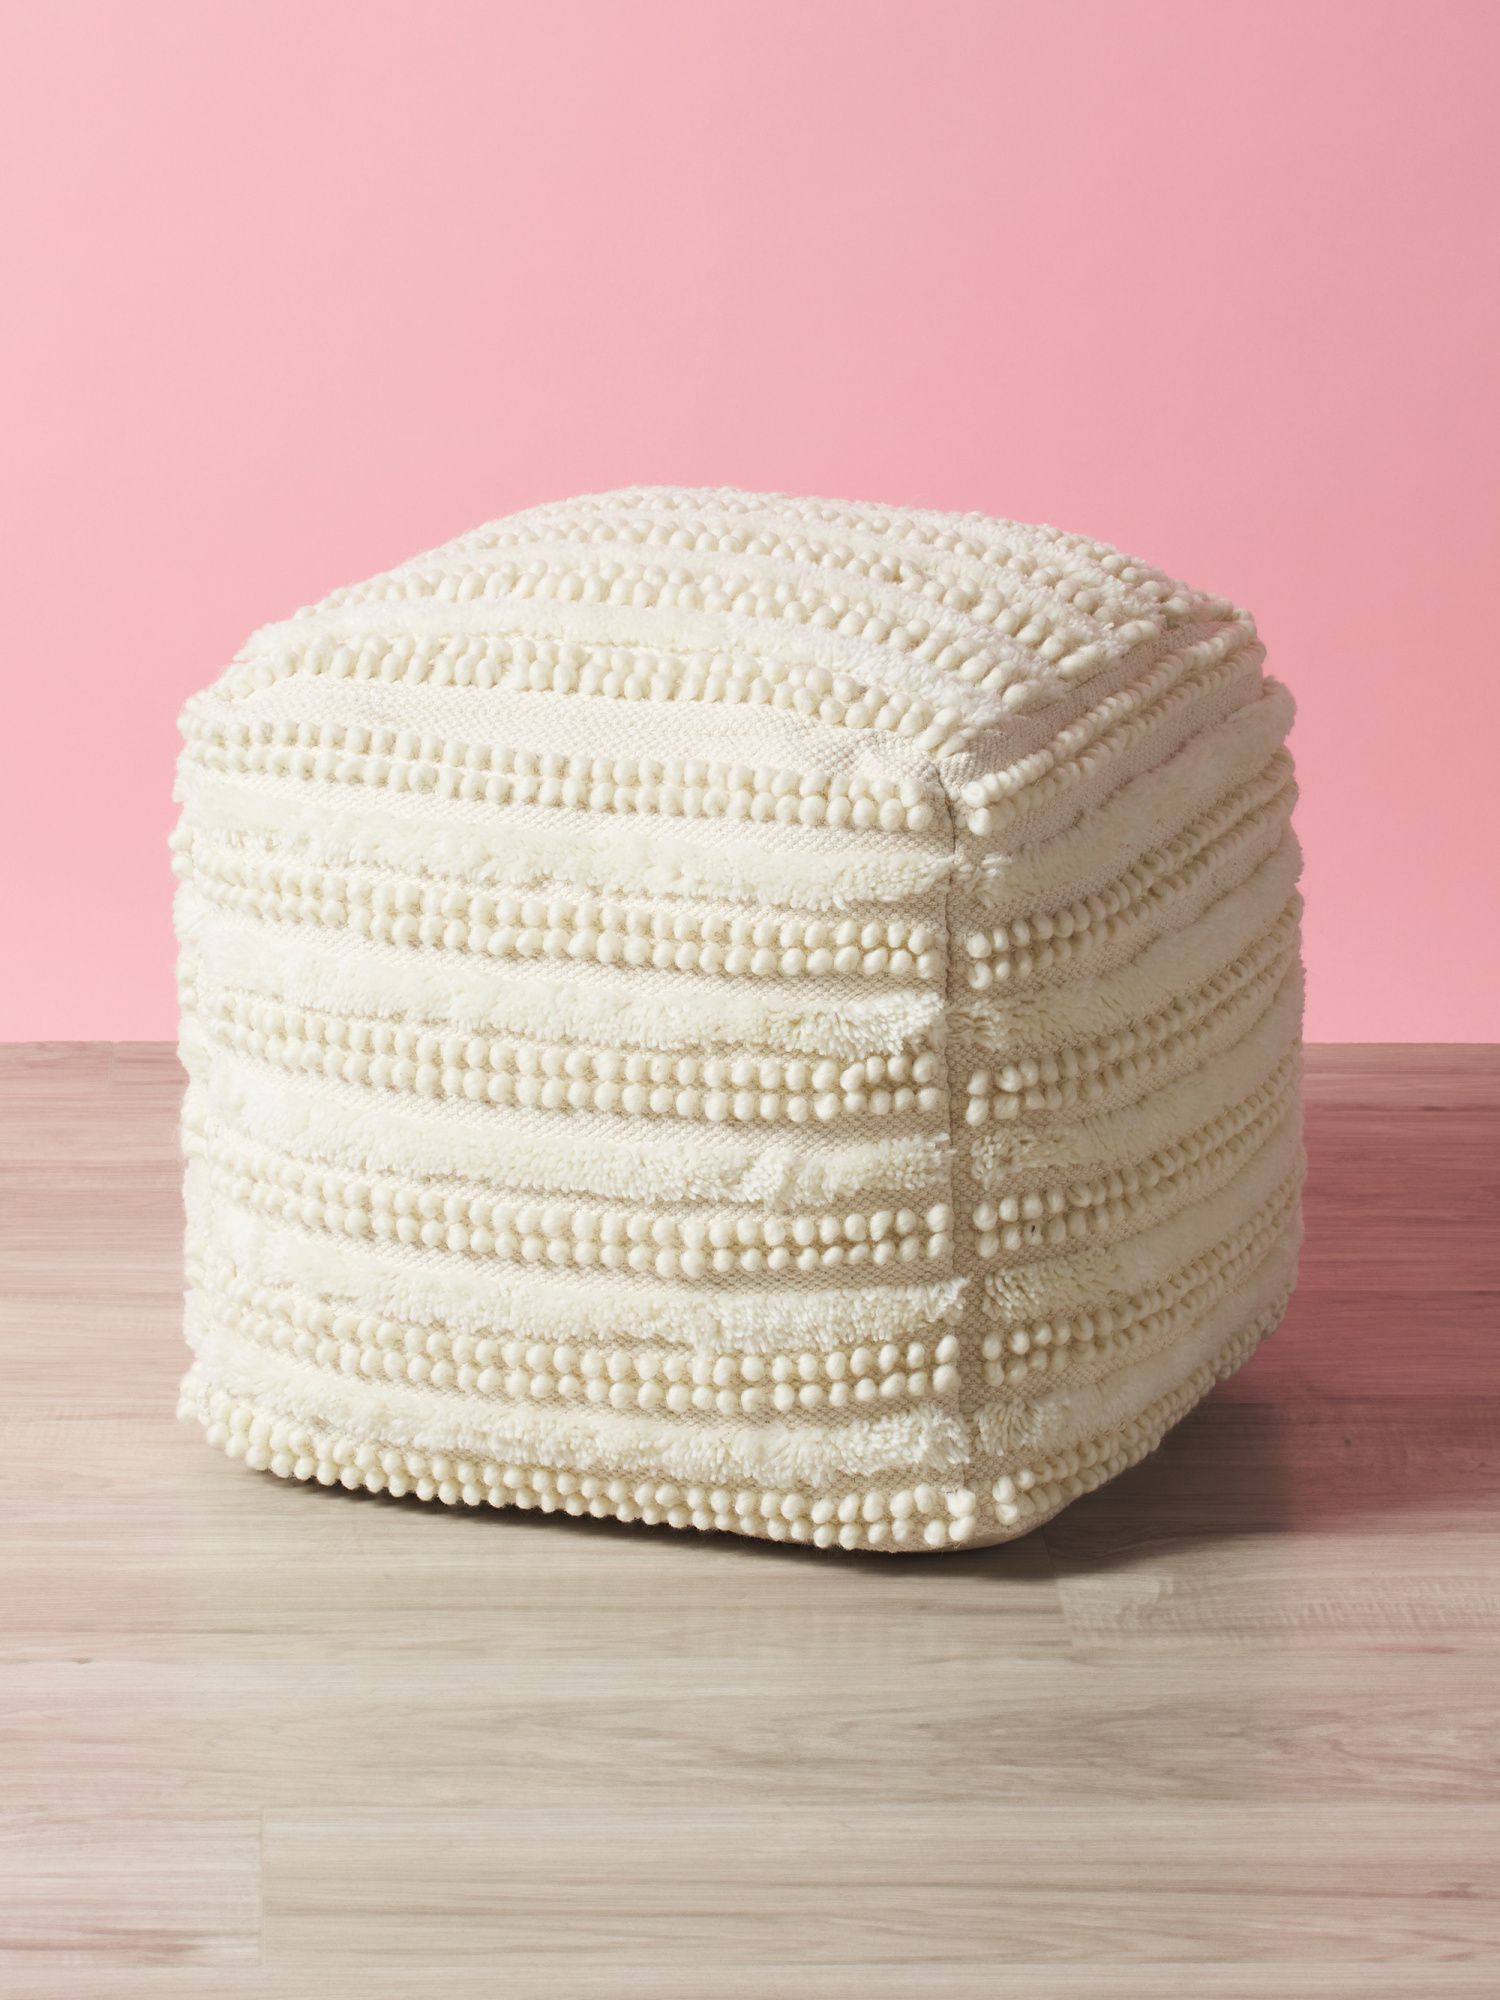 Made In India 18x18 Woven Textured Pouf | Big Ticket Shop | HomeGoods | HomeGoods